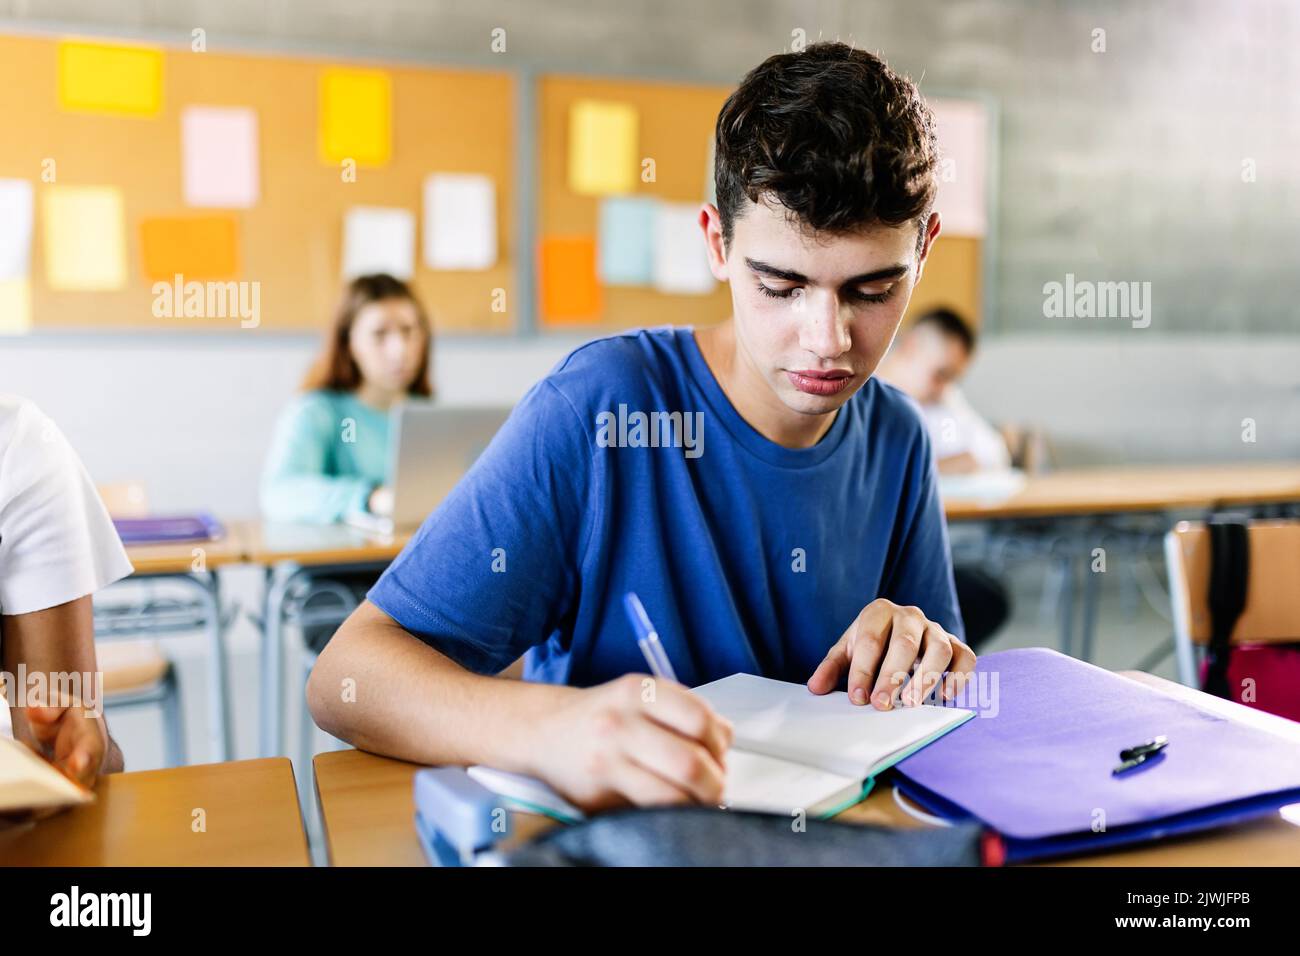 High school young student writing to notebook in class lecture Stock Photo